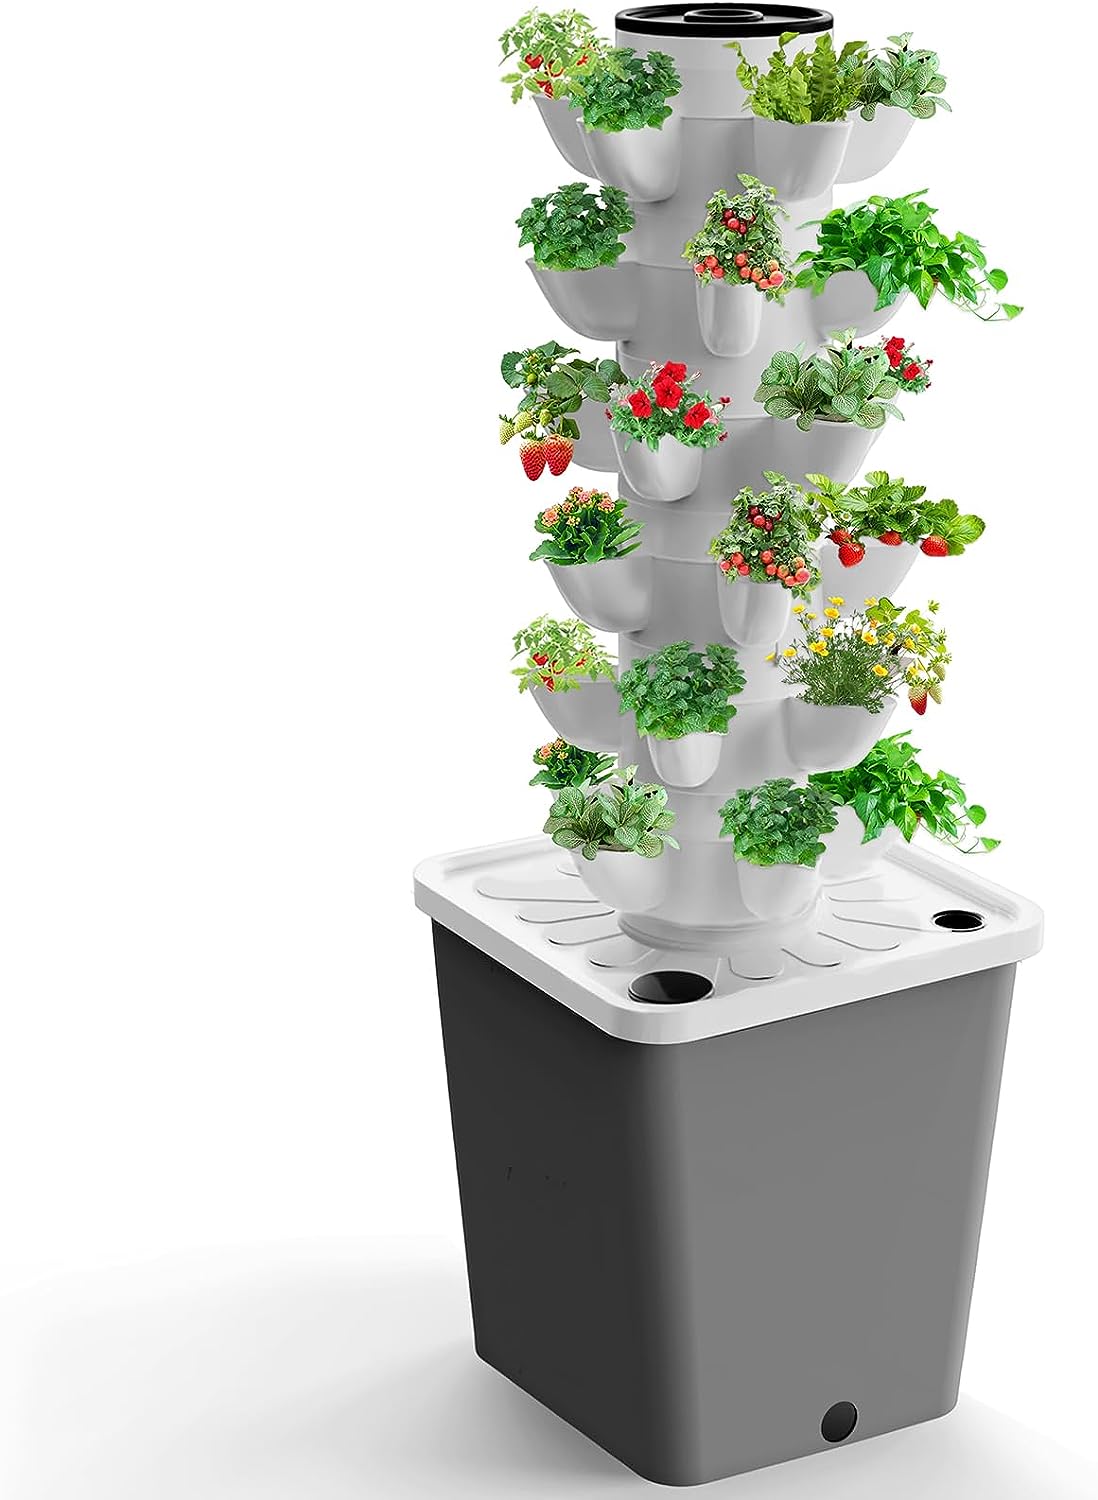 OvyNewzly Vertical Hydroponic Tower Garden